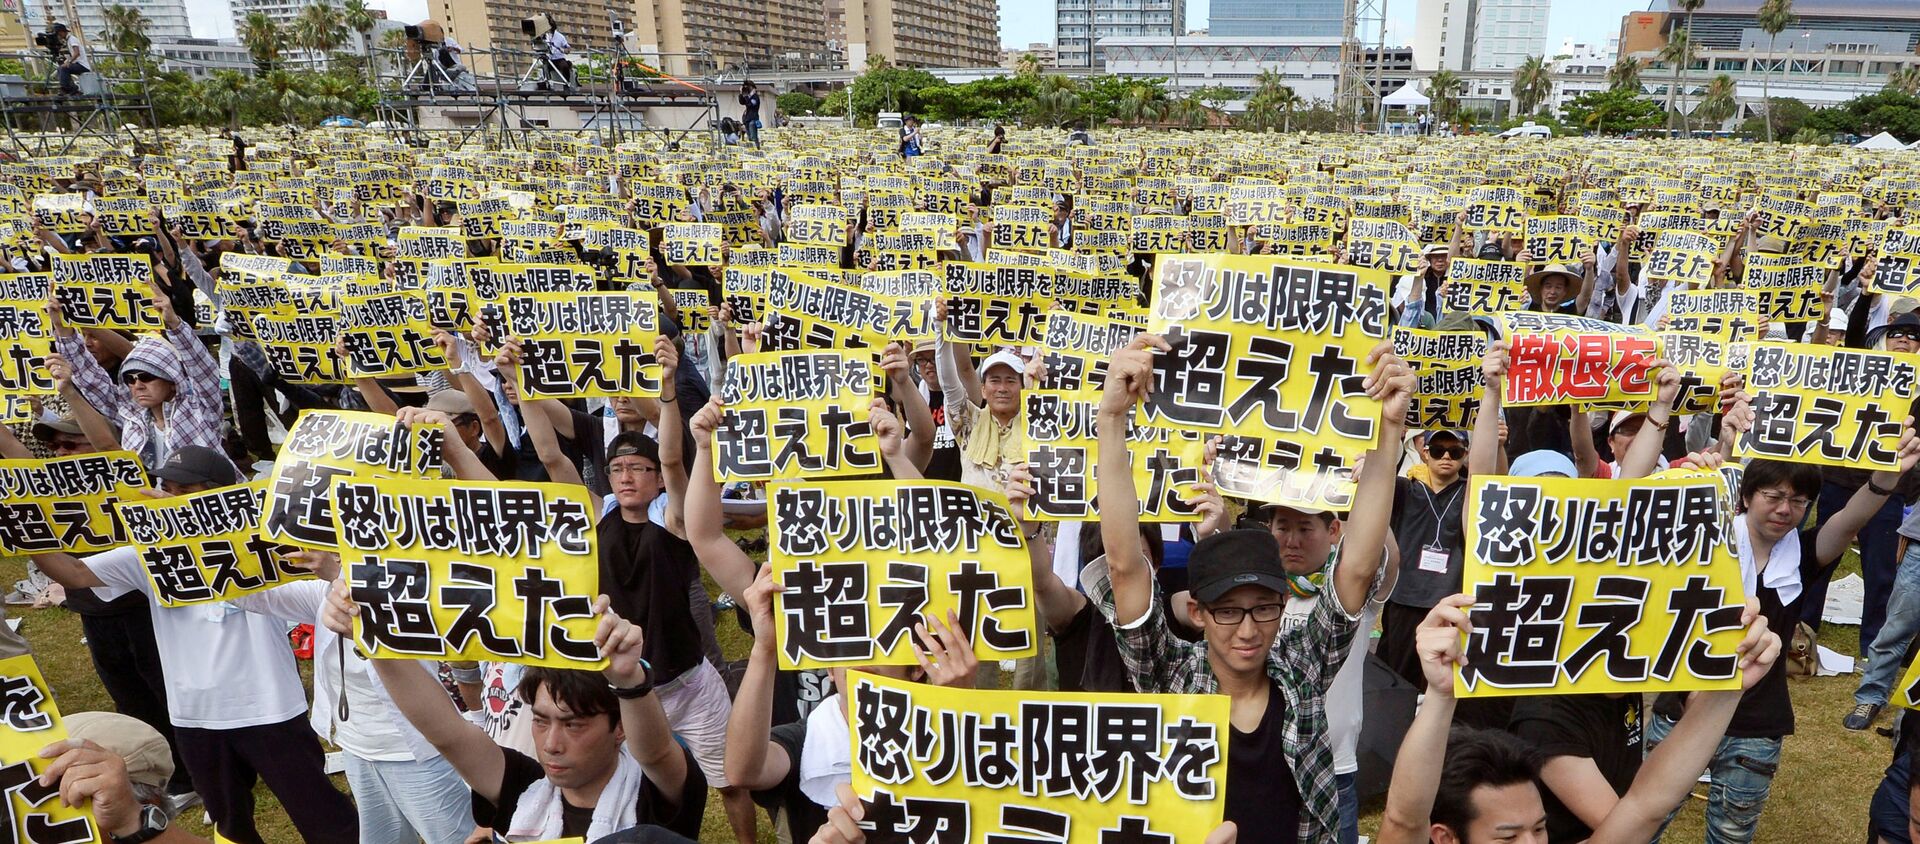 Protesters raise placards reading Anger was over the limit during a rally against the U.S. military presence on the island and a series of crimes and other incidents involving U.S. soldiers and base workers, at a park in the prefectural capital Naha on Japan's southern island of Okinawa, Japan, in this photo taken by Kyodo June 19, 2016 - Sputnik International, 1920, 19.06.2016